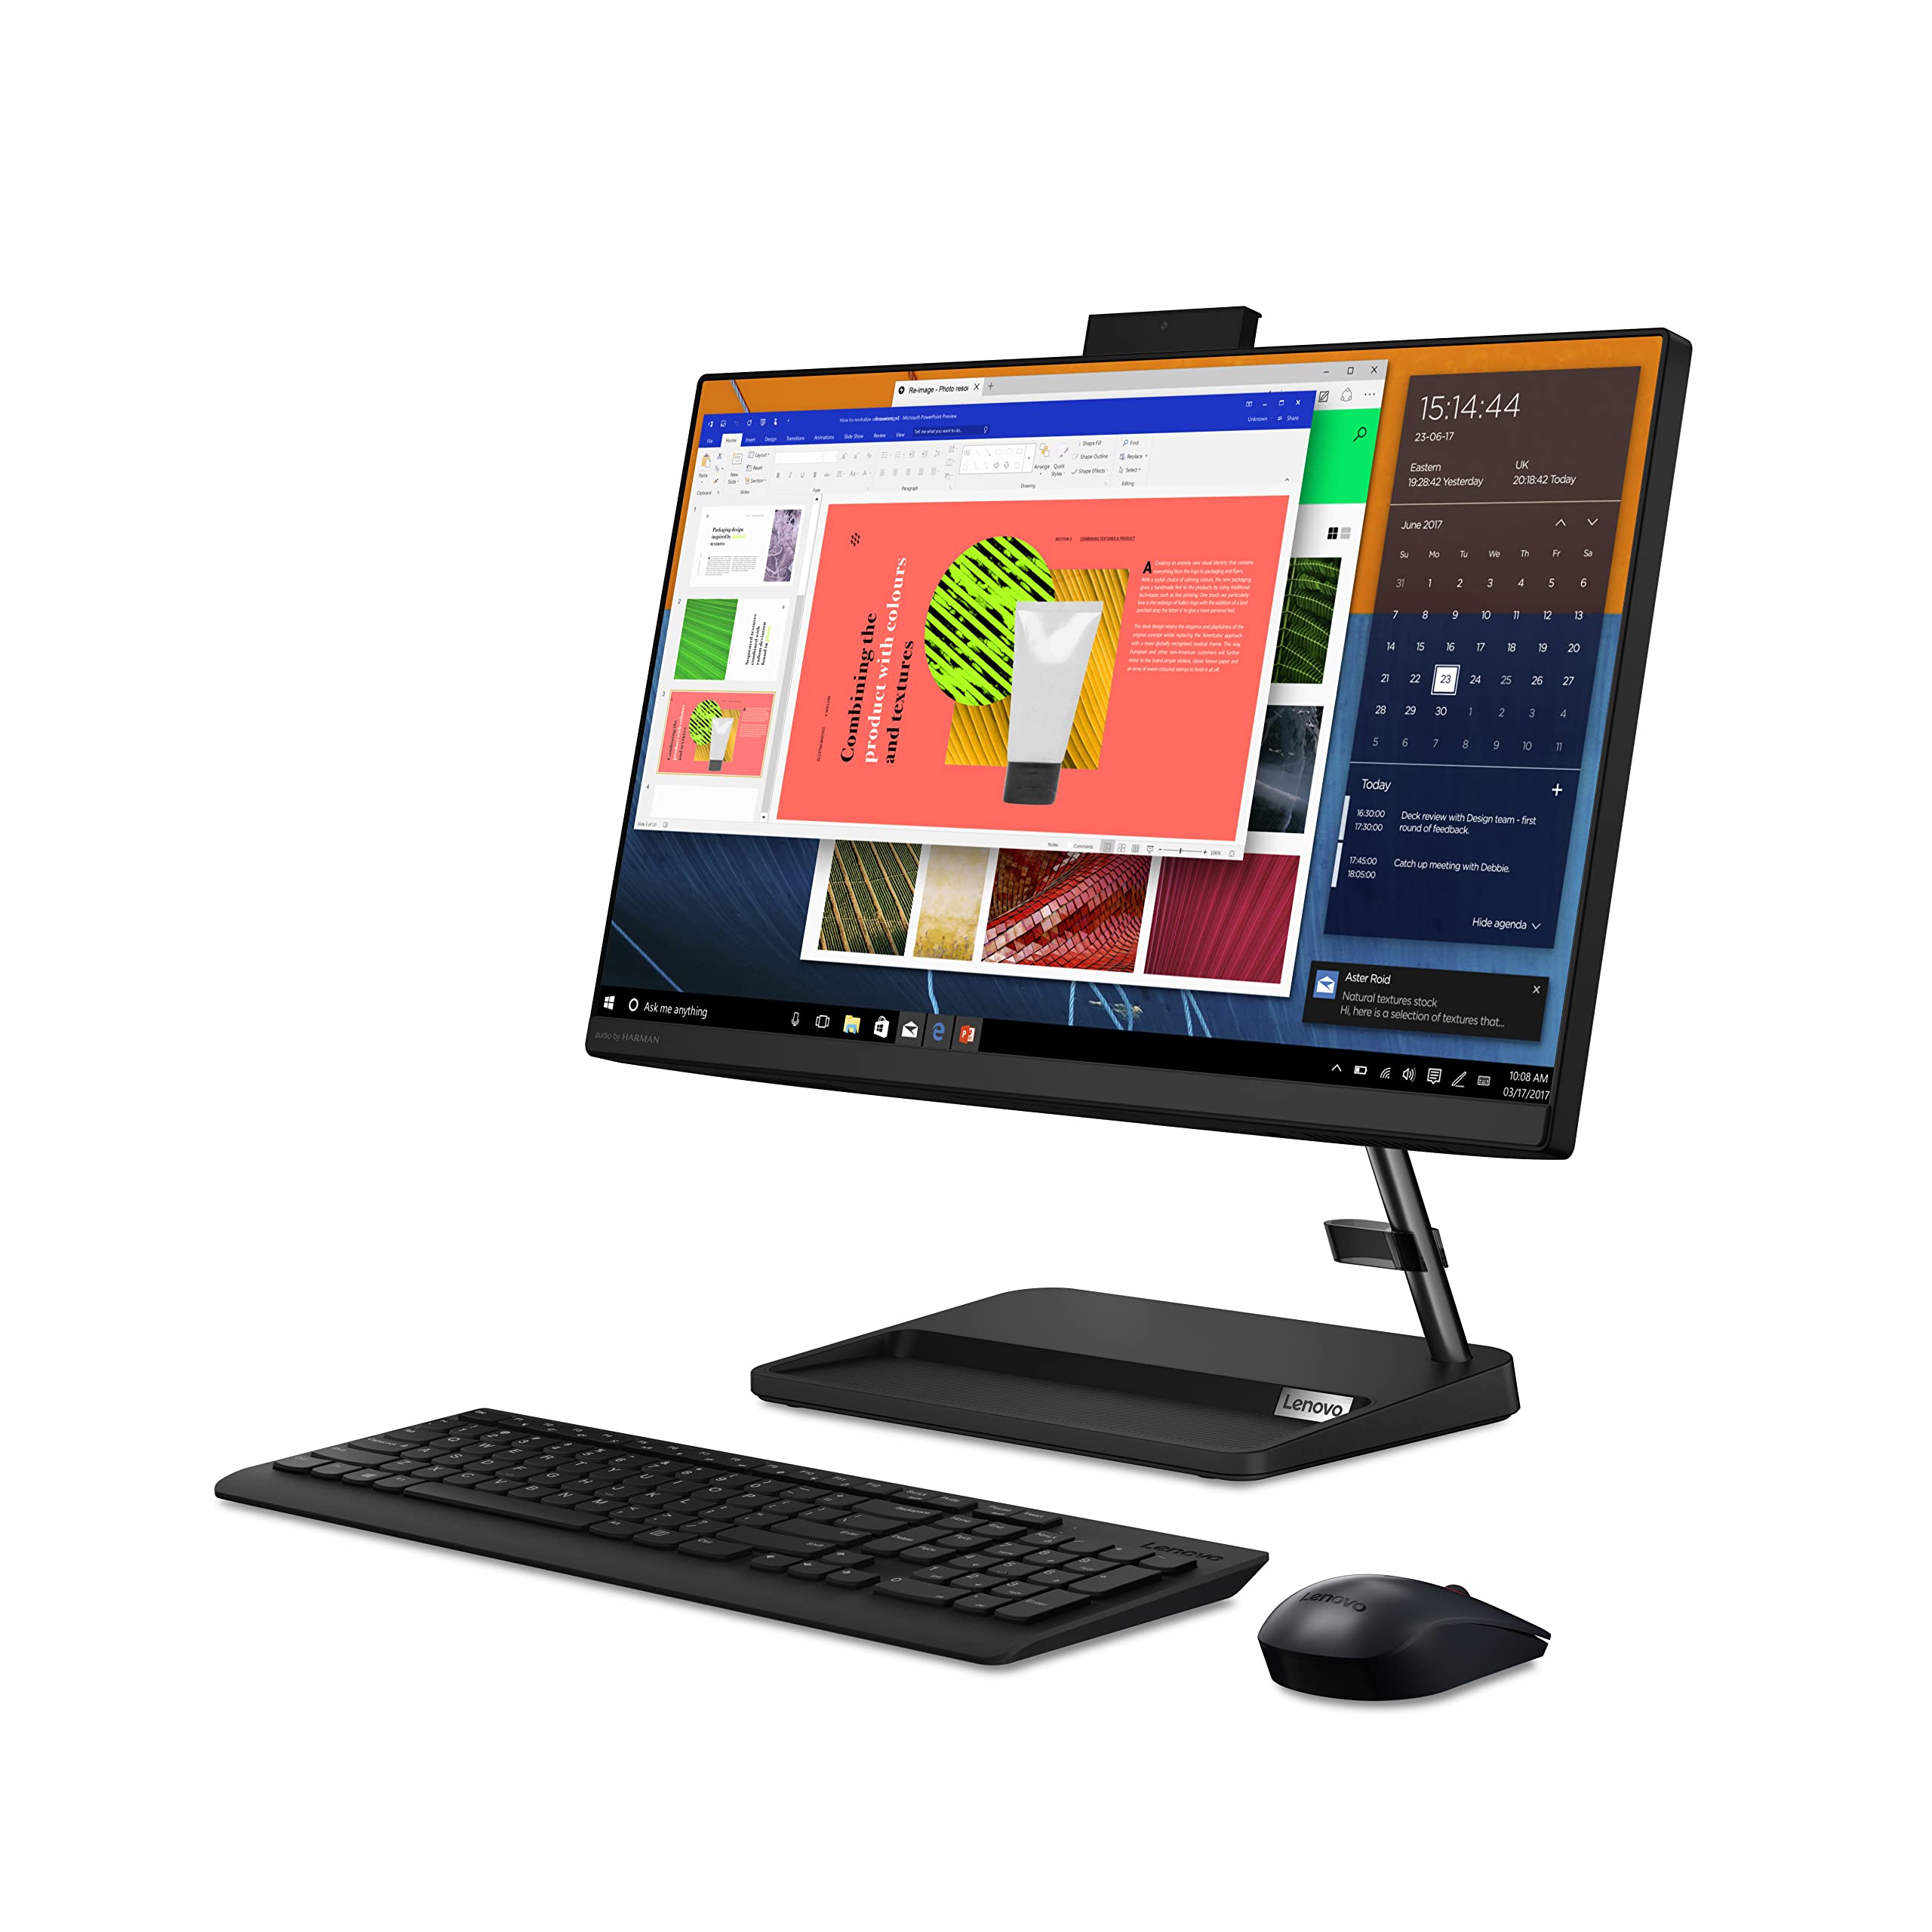 Lenovo IdeaCentre AIO 3i - 2023 - All-in-One Computer – Wireless Mouse & Keyboard Included - 21.5” Full HD – HD Camera - Windows 11 Home – 8GB Memory – 256GB Storage - Intel Core i3-1115G4 - Black